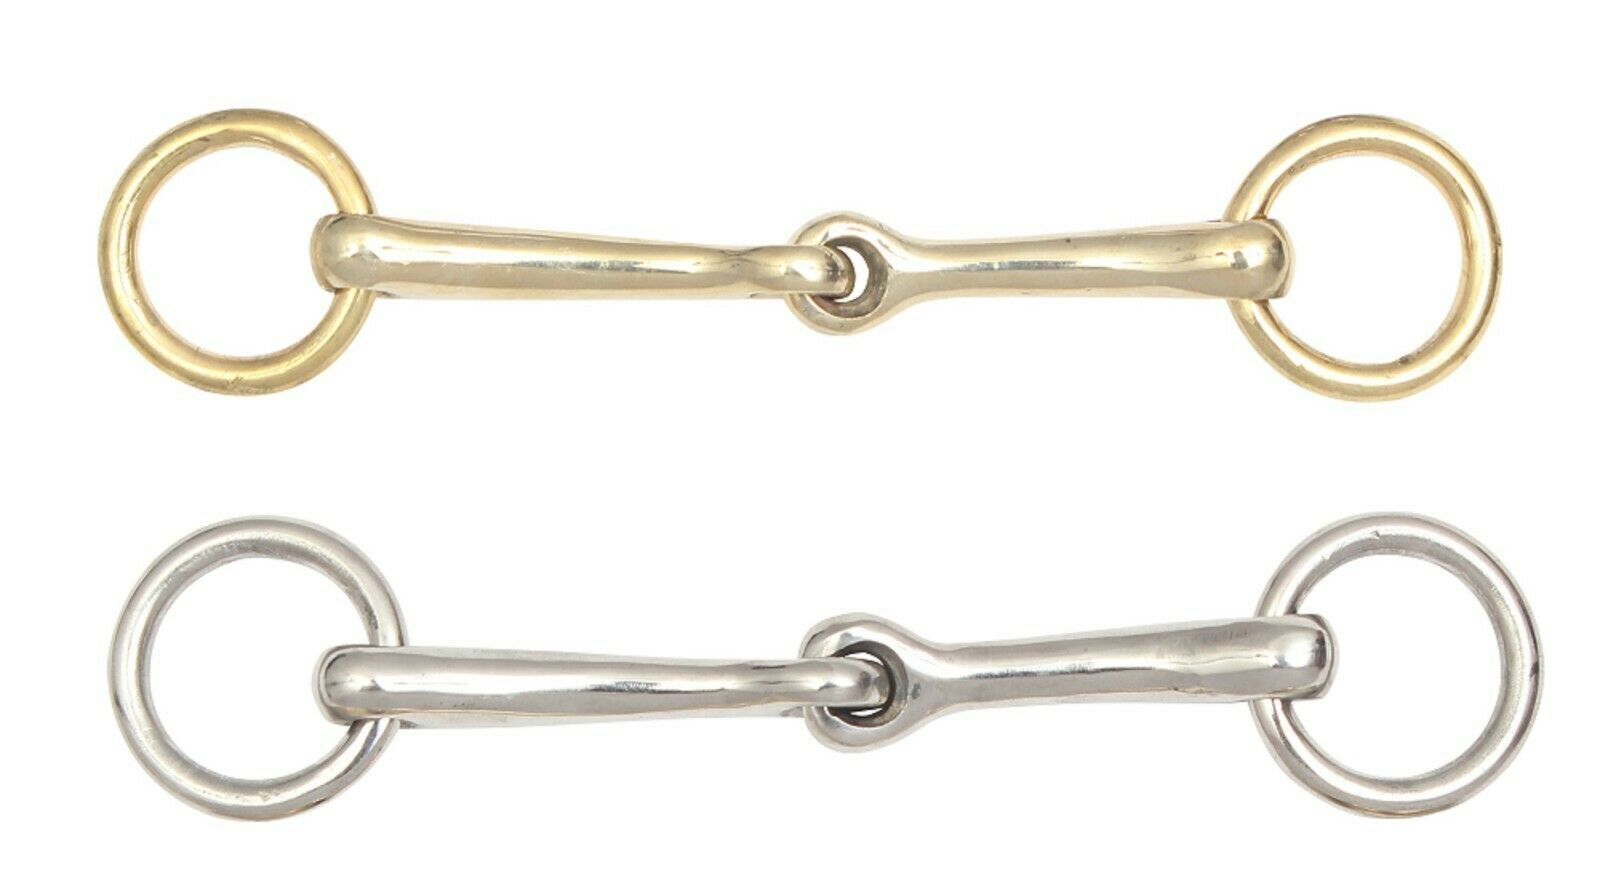 CaresWorth Pony Mini Horse Snaffle Bit Stainless Steel Silver and Gold